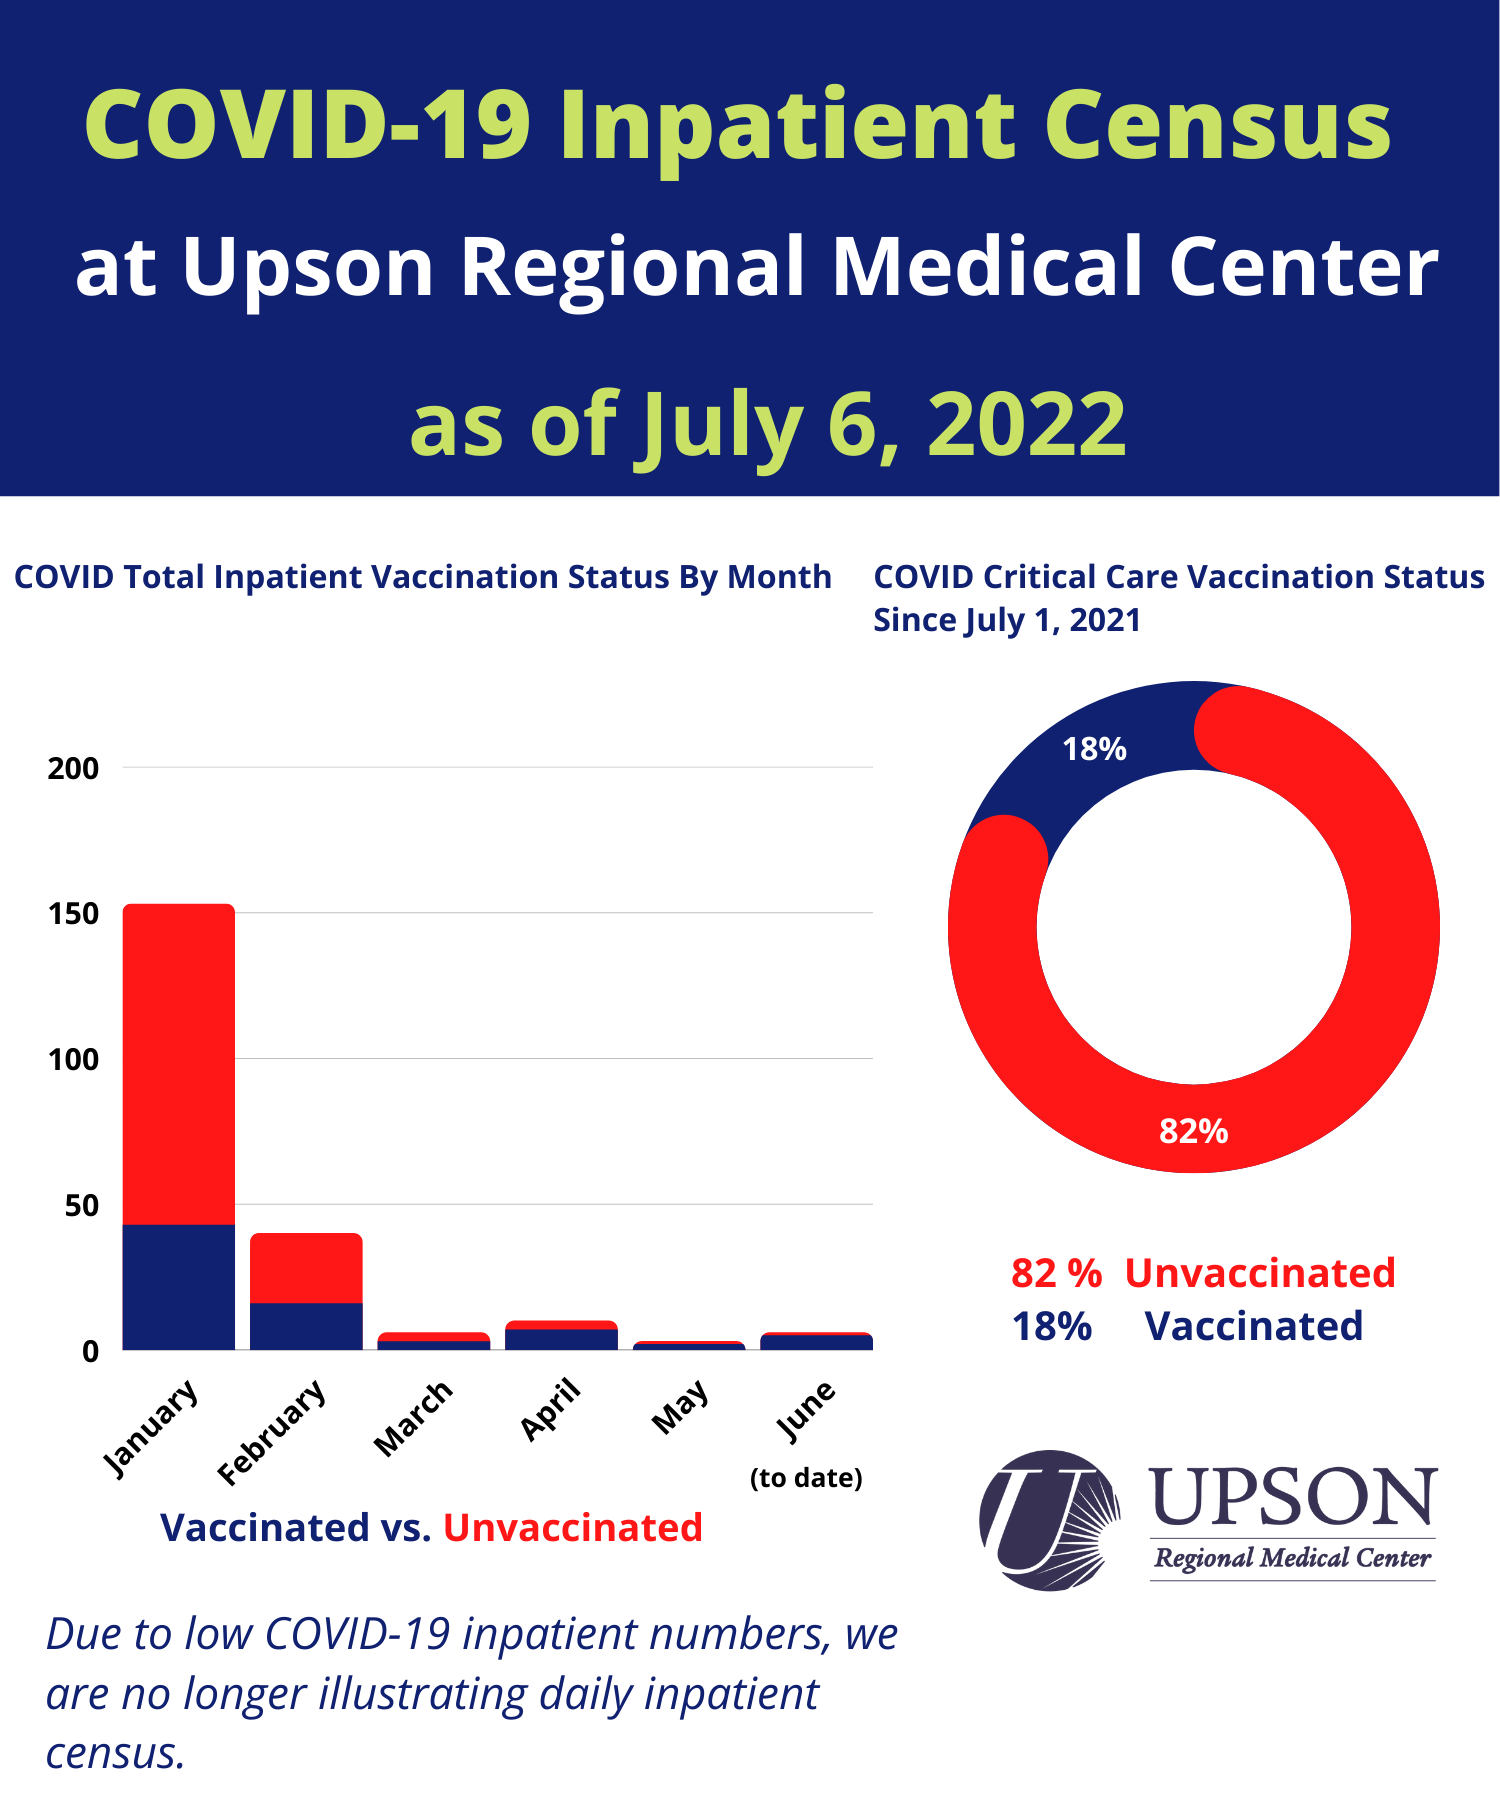 Photo for URMC COVID-19 Inpatients as of July 6, 2022 